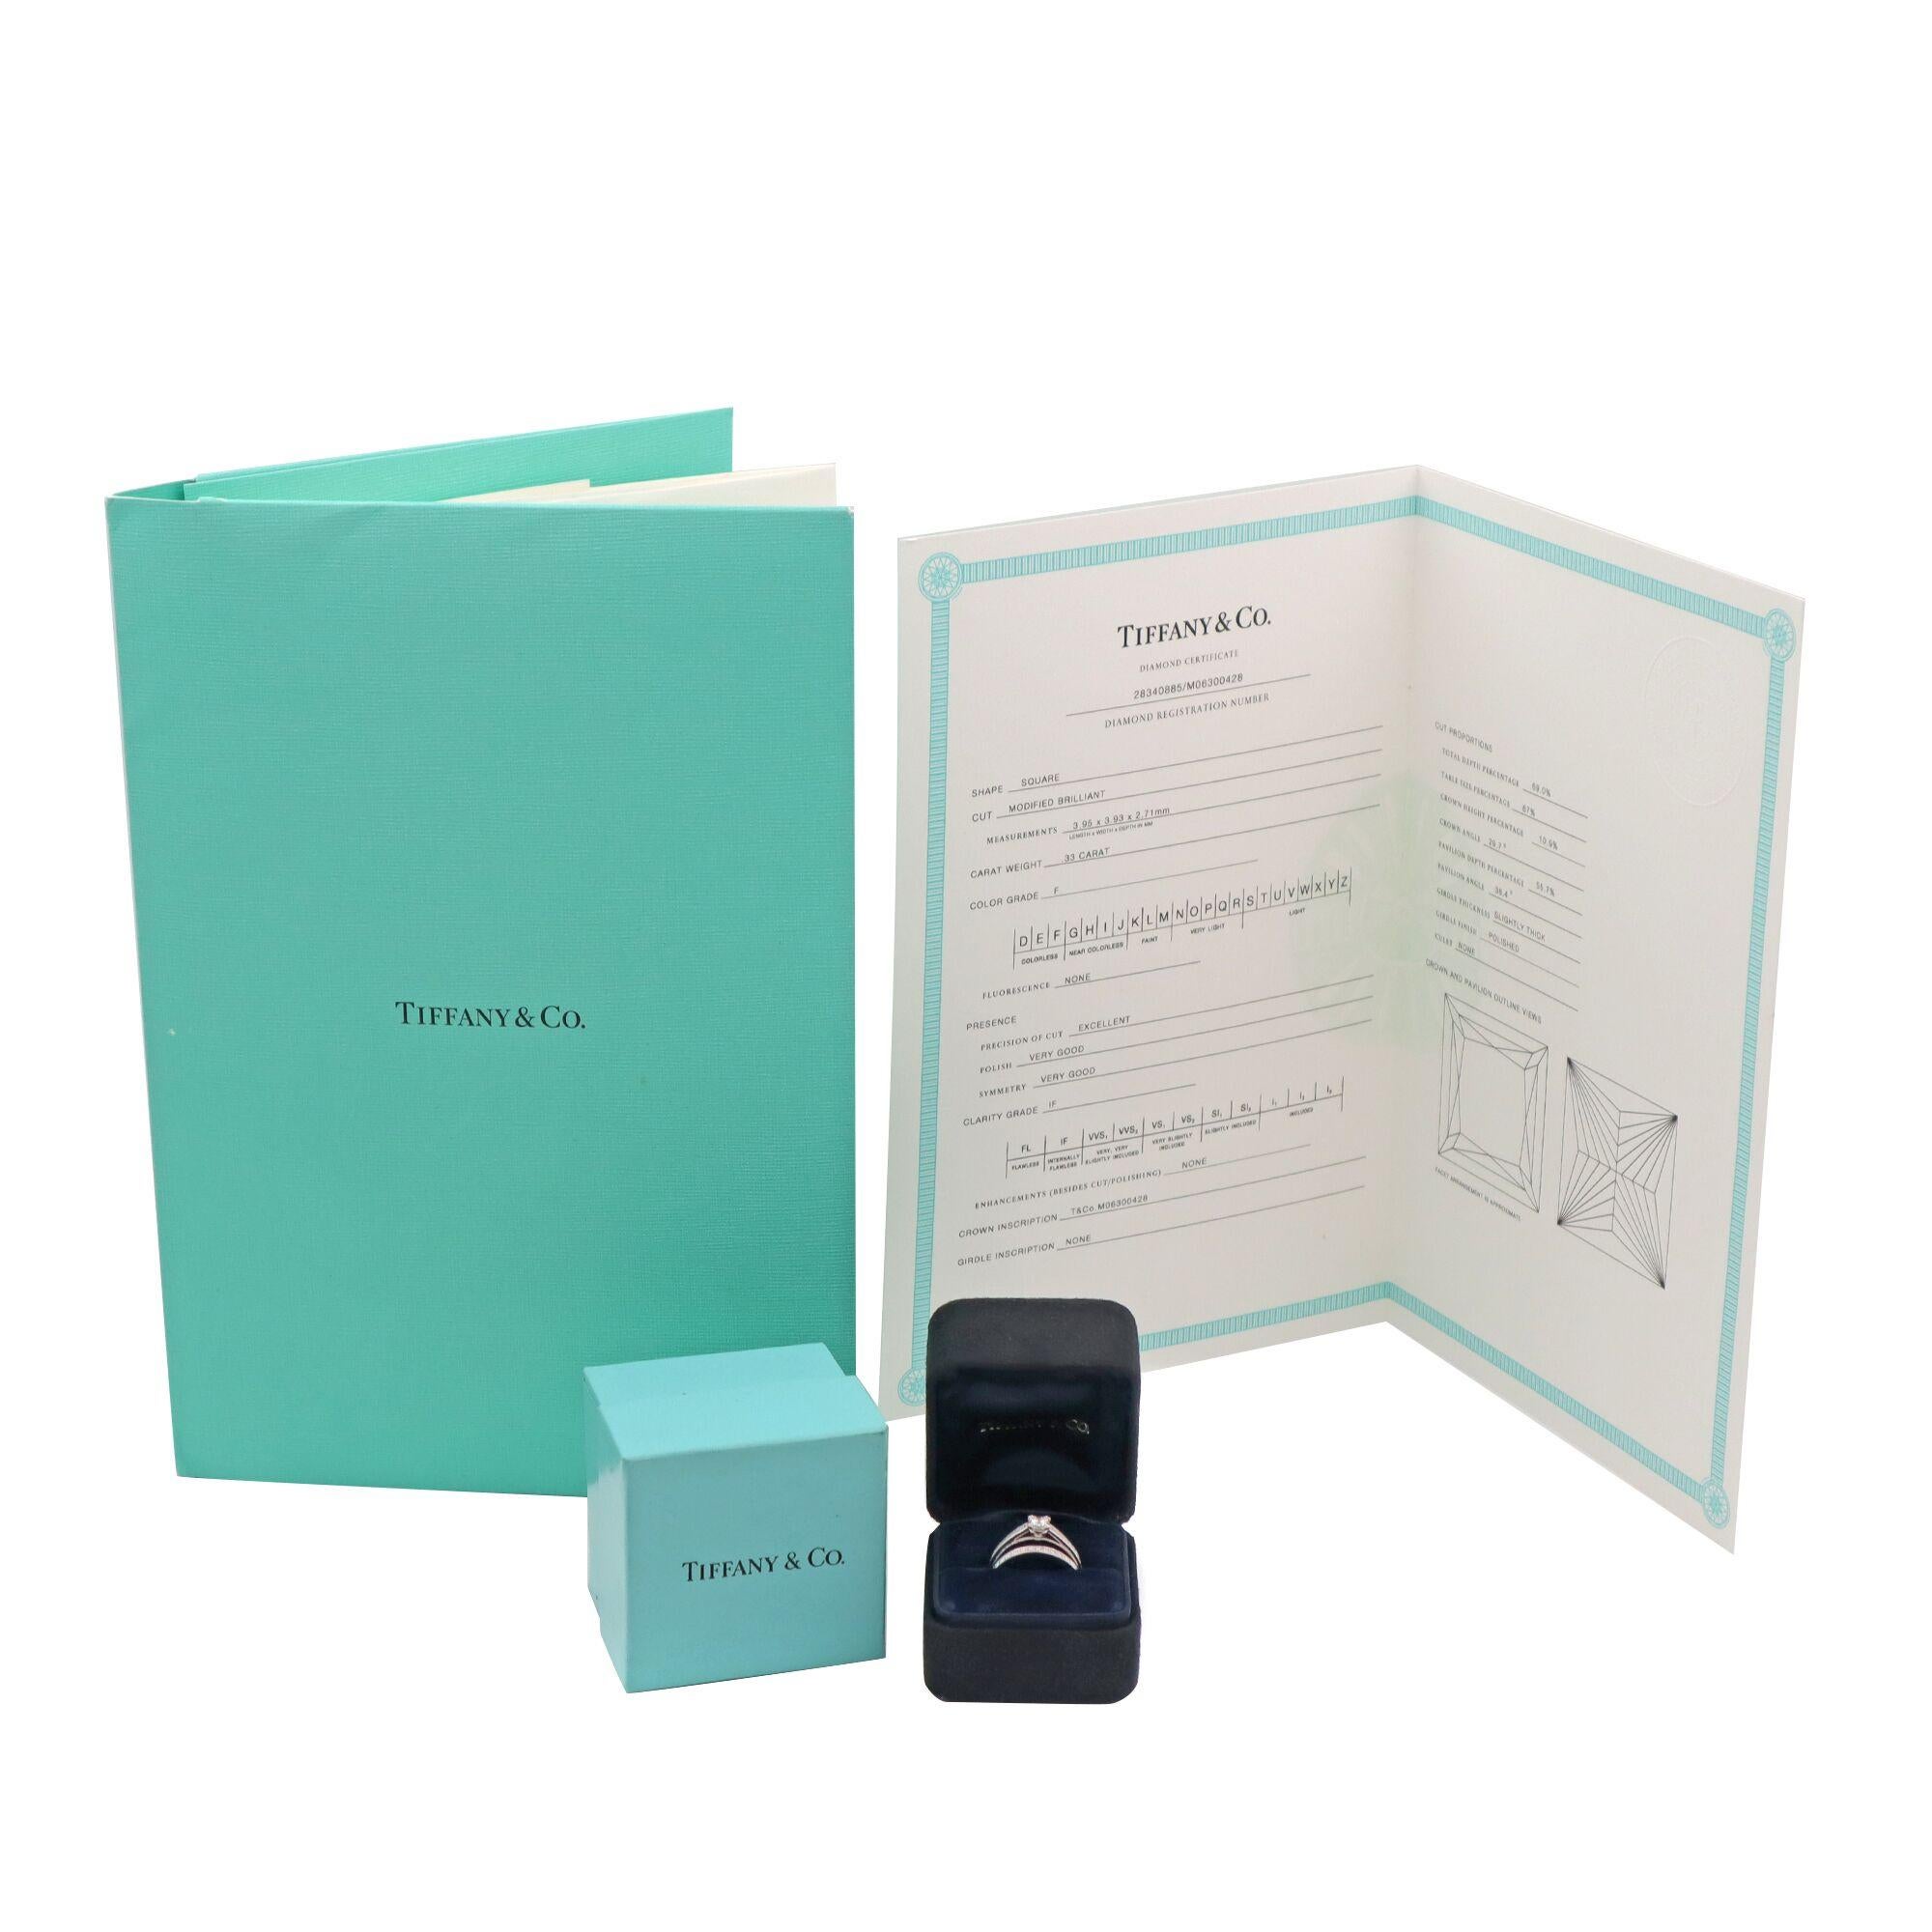 Women's Tiffany & Co. Platinum Engagement Ring and Band Set Total 0.60 Carat